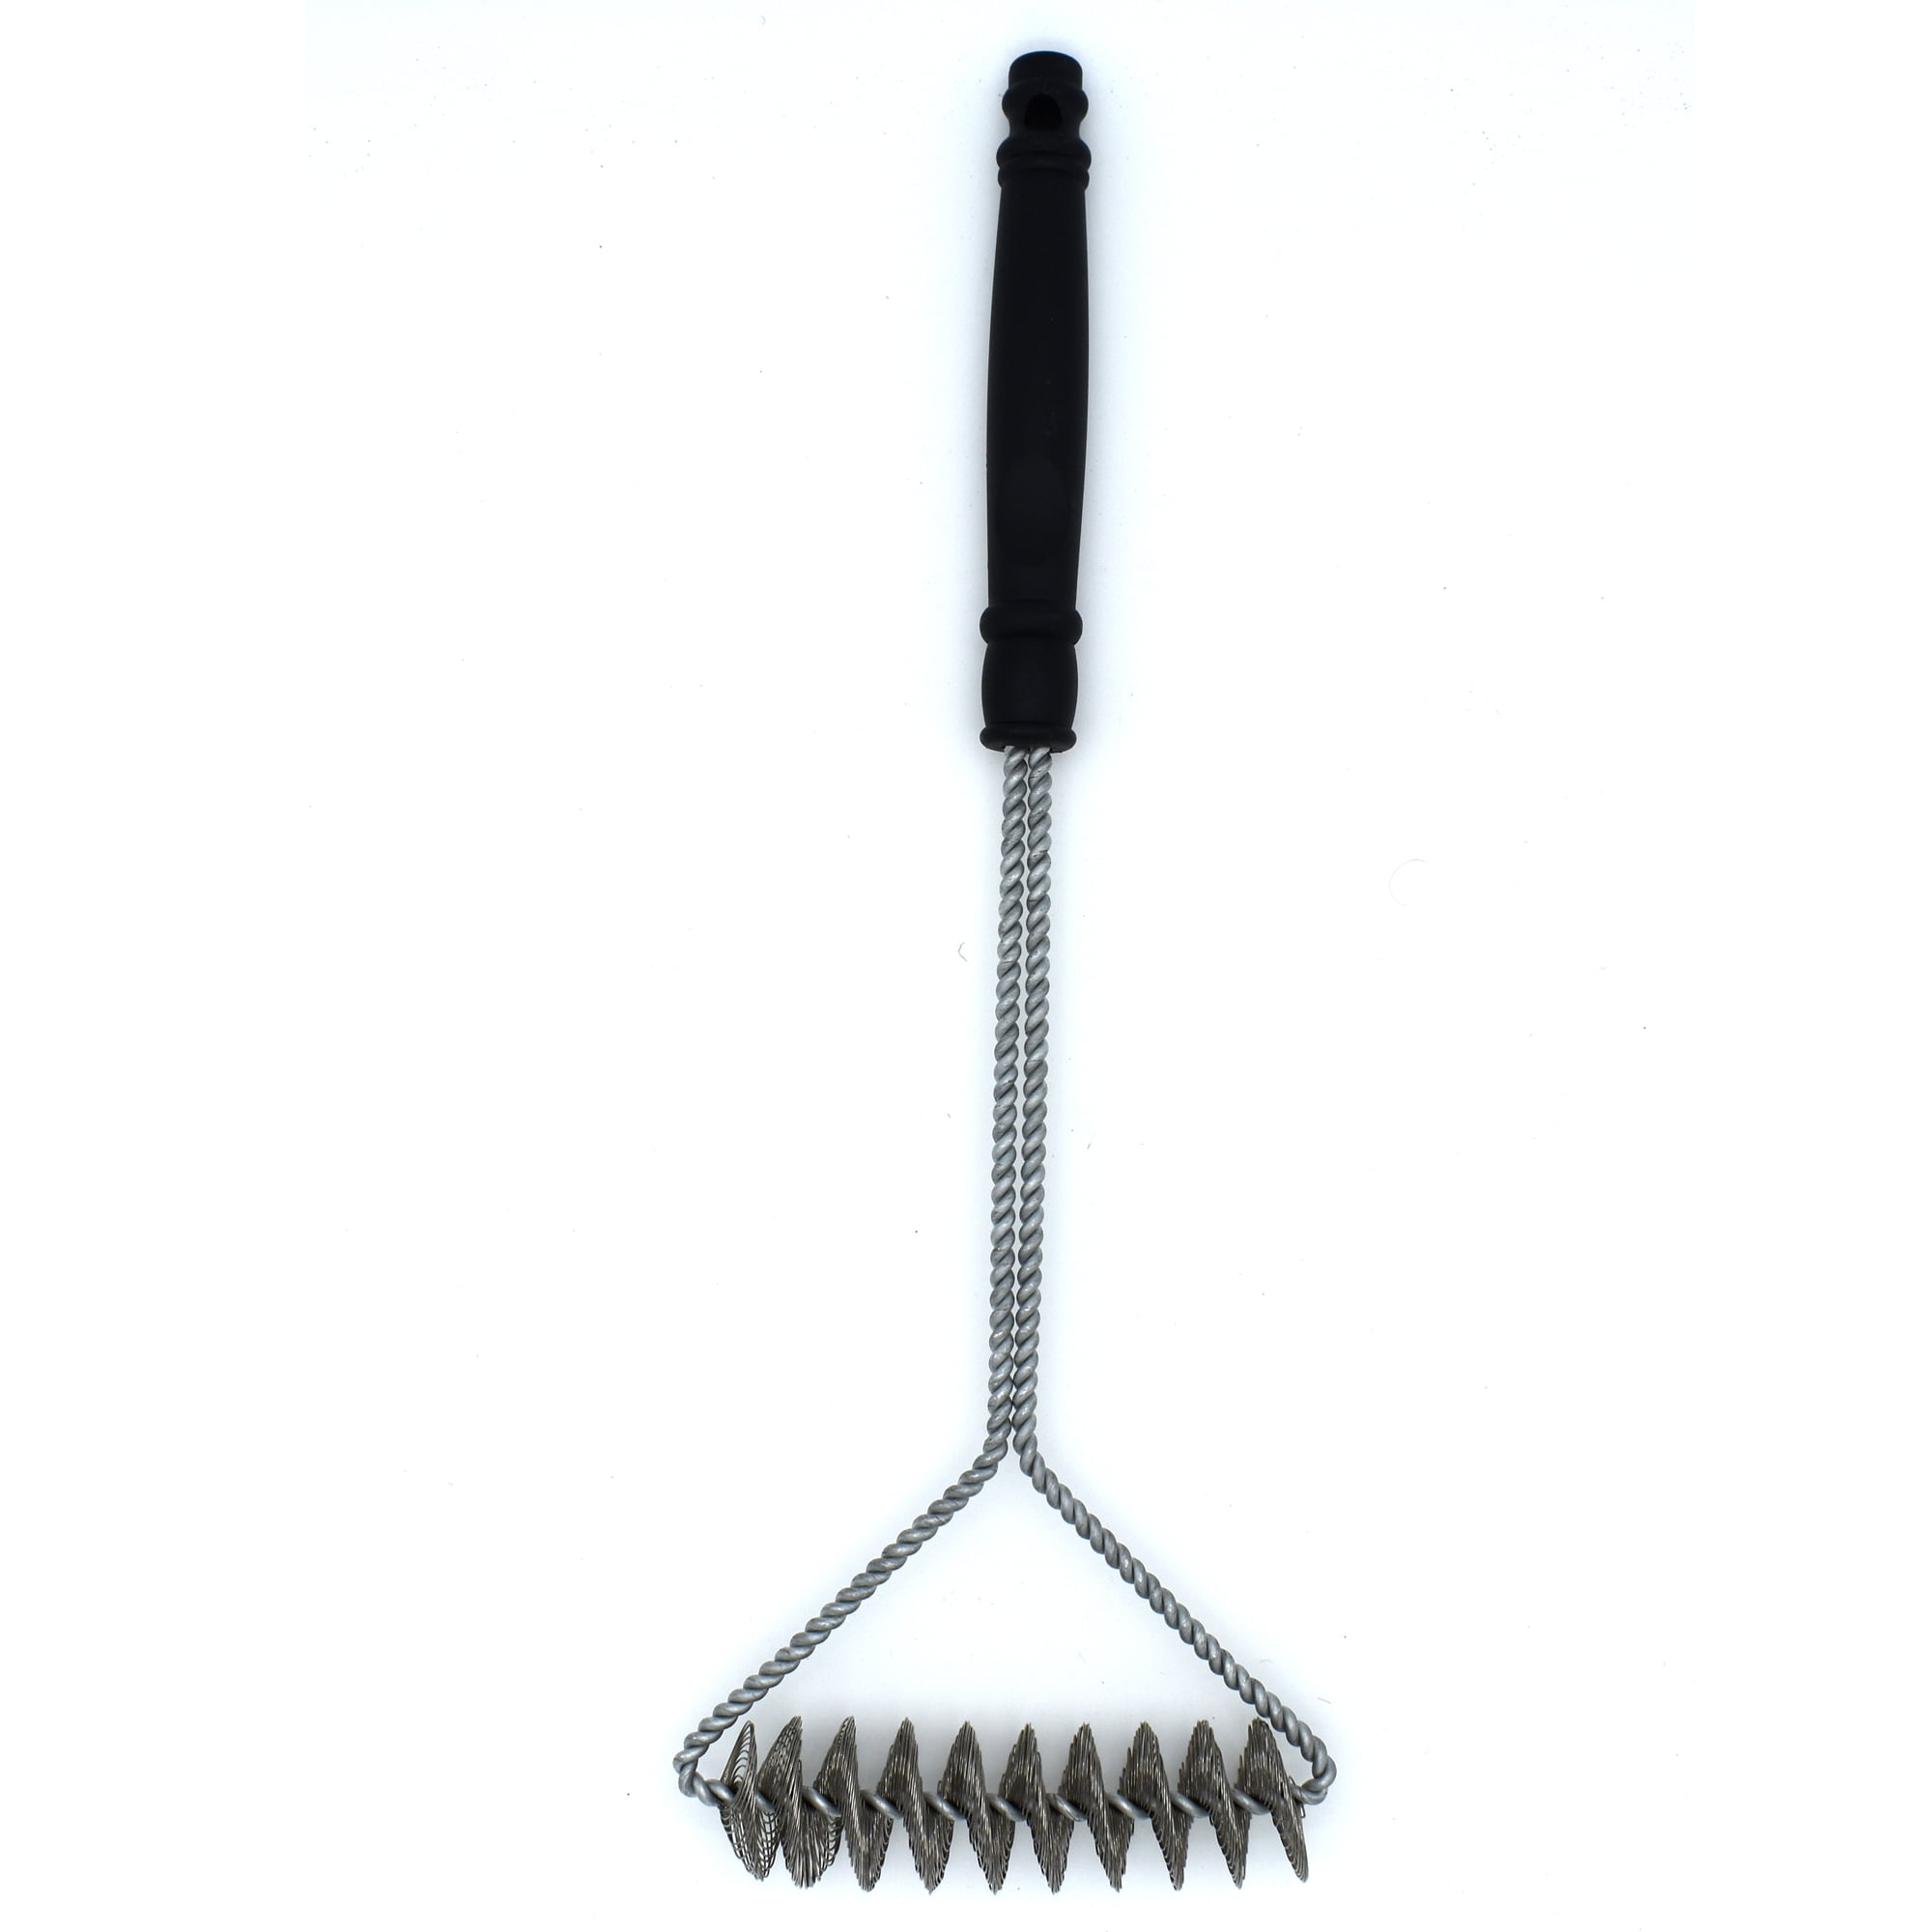 Details about   Mr Bar-B-Q Triple Action Grill Brush Durable Stainless Steel Bristles New 